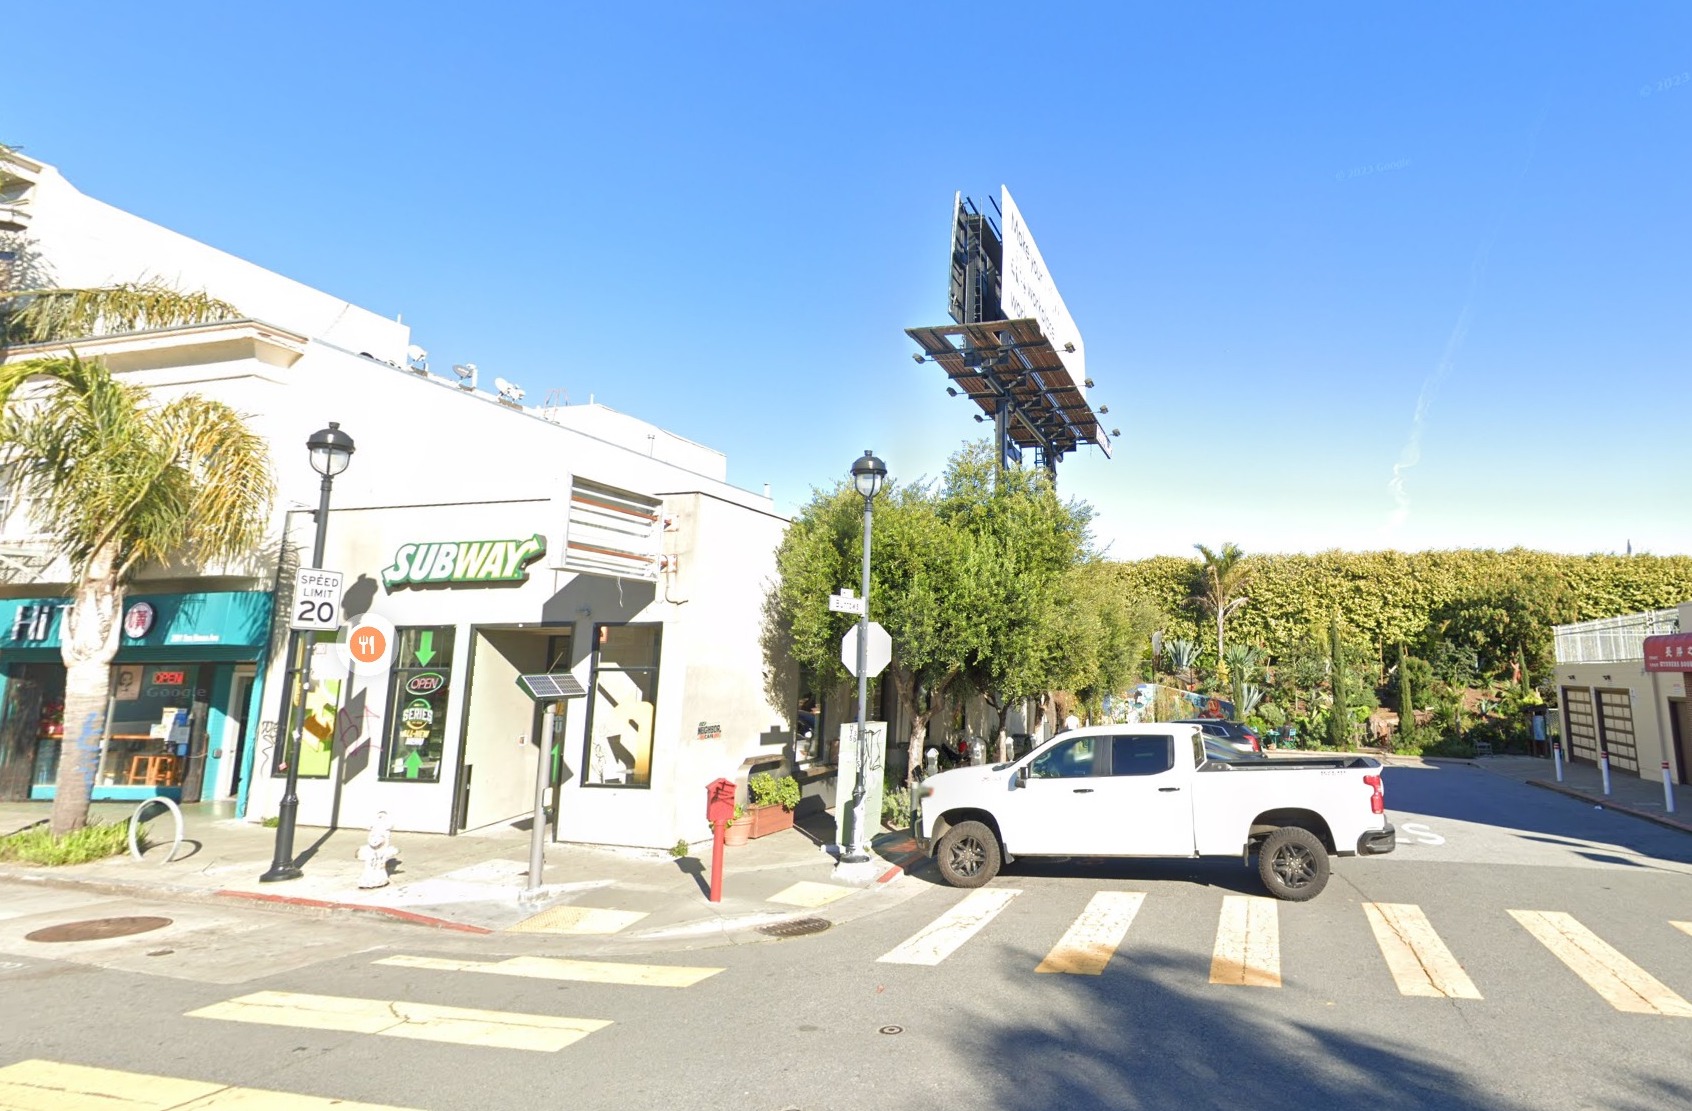 A sunny street intersection under blue skies with a white pickup truck parked outside one of several businesses.